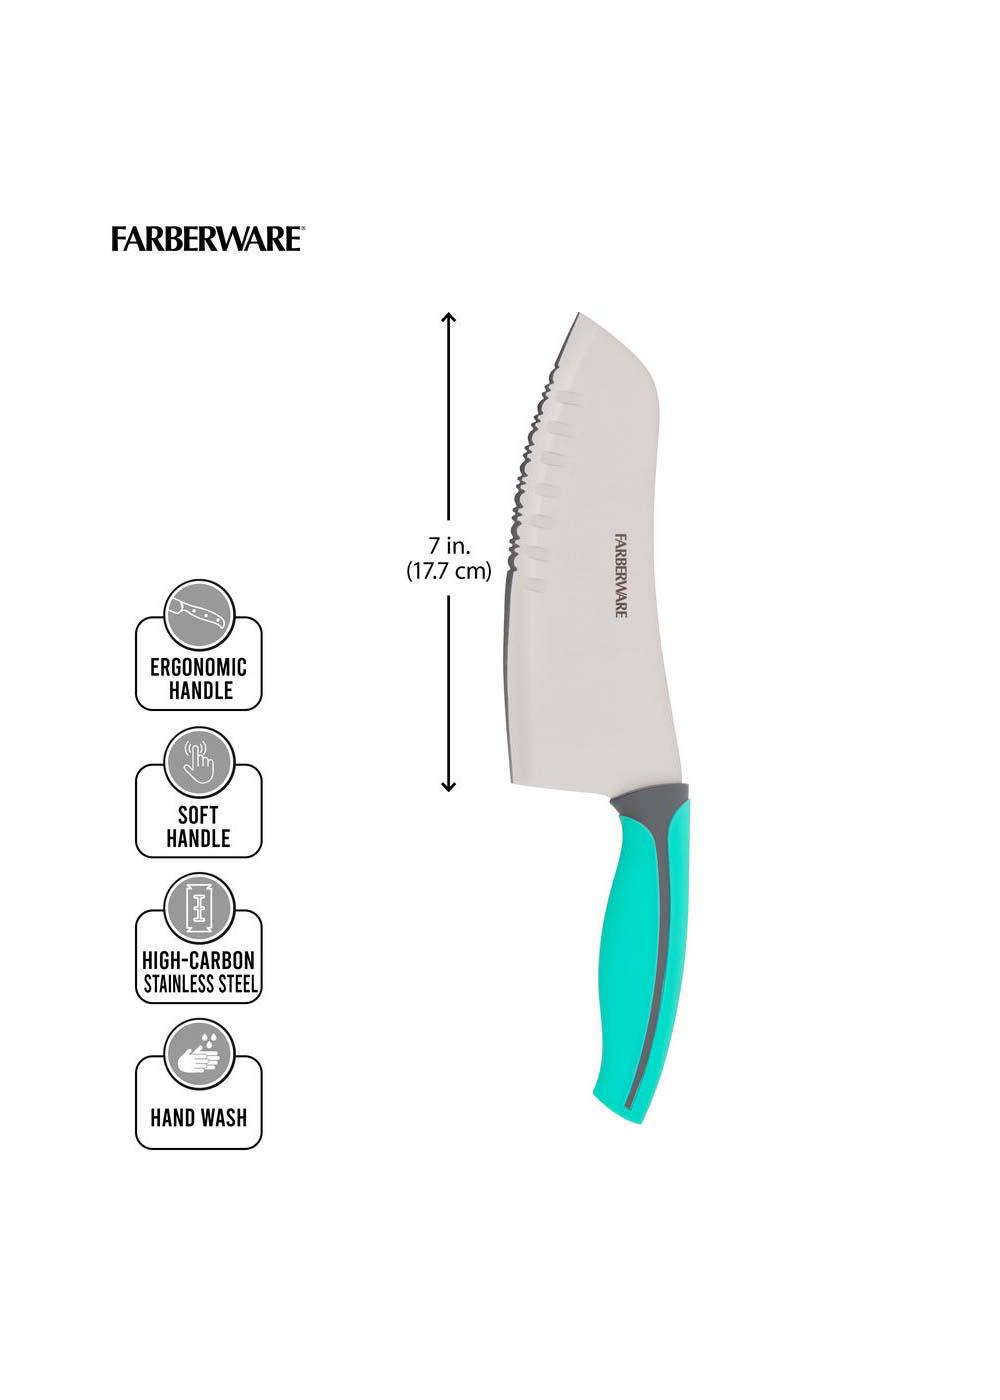 Farberware Precise Slice 3-piece Soft Grip Chef Knife Set, 8-inch Serrated  Chef, 5.5-inch Serrated Utility, and 3.5-inch Trimming Parer, Assorted